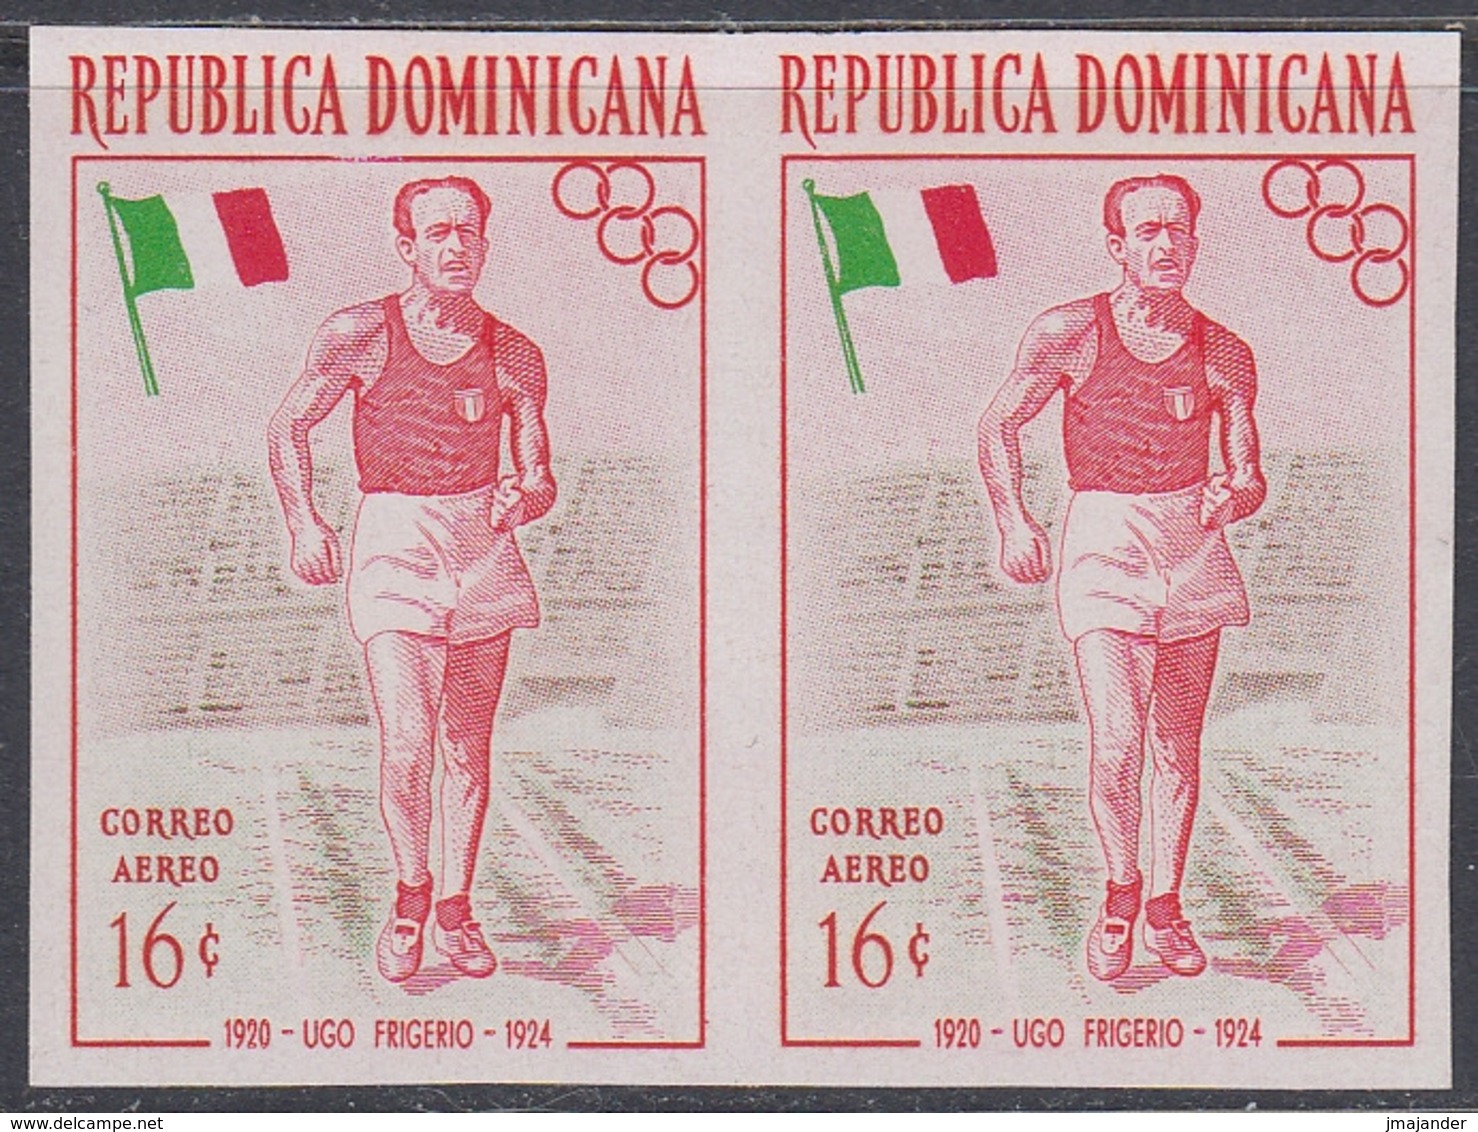 Dominican Republic 1957 - Olympic Games In Melbourne: Frigerio, Race Walking, Athletics - Imperforate Pair Mi 566 ** MNH - Sommer 1956: Melbourne